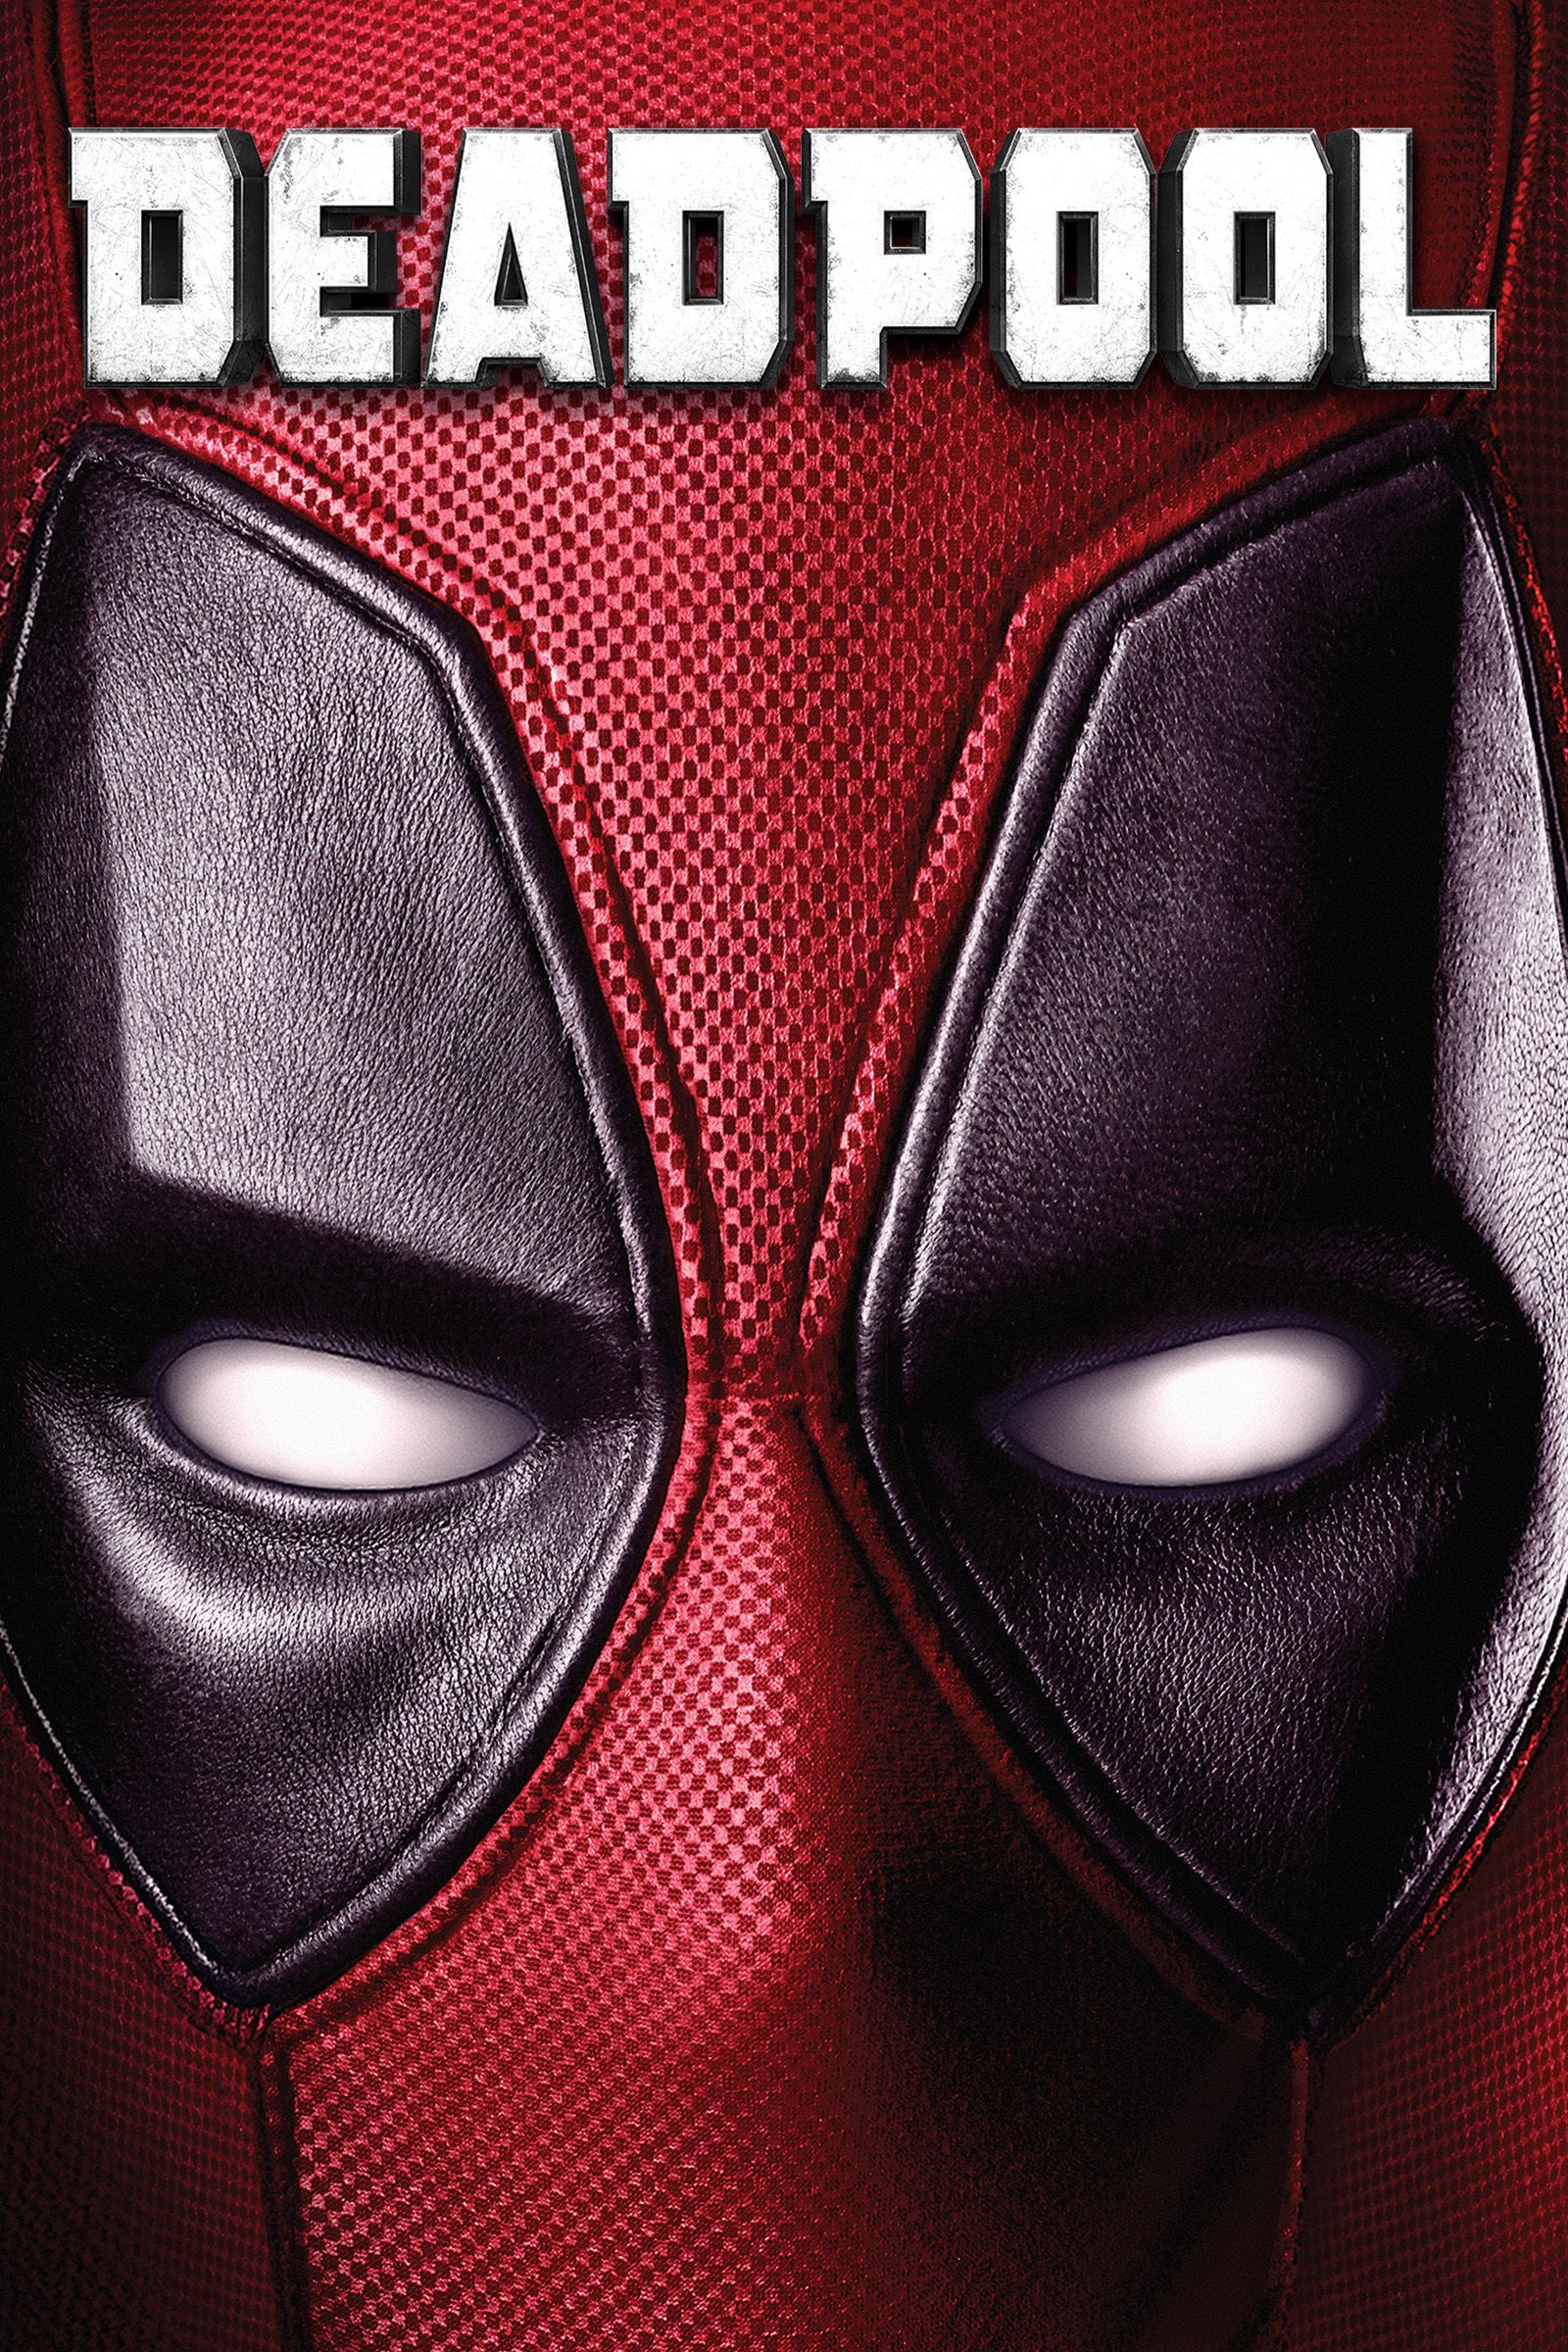 dianna tuttle recommends deadpool full movie in hindi pic